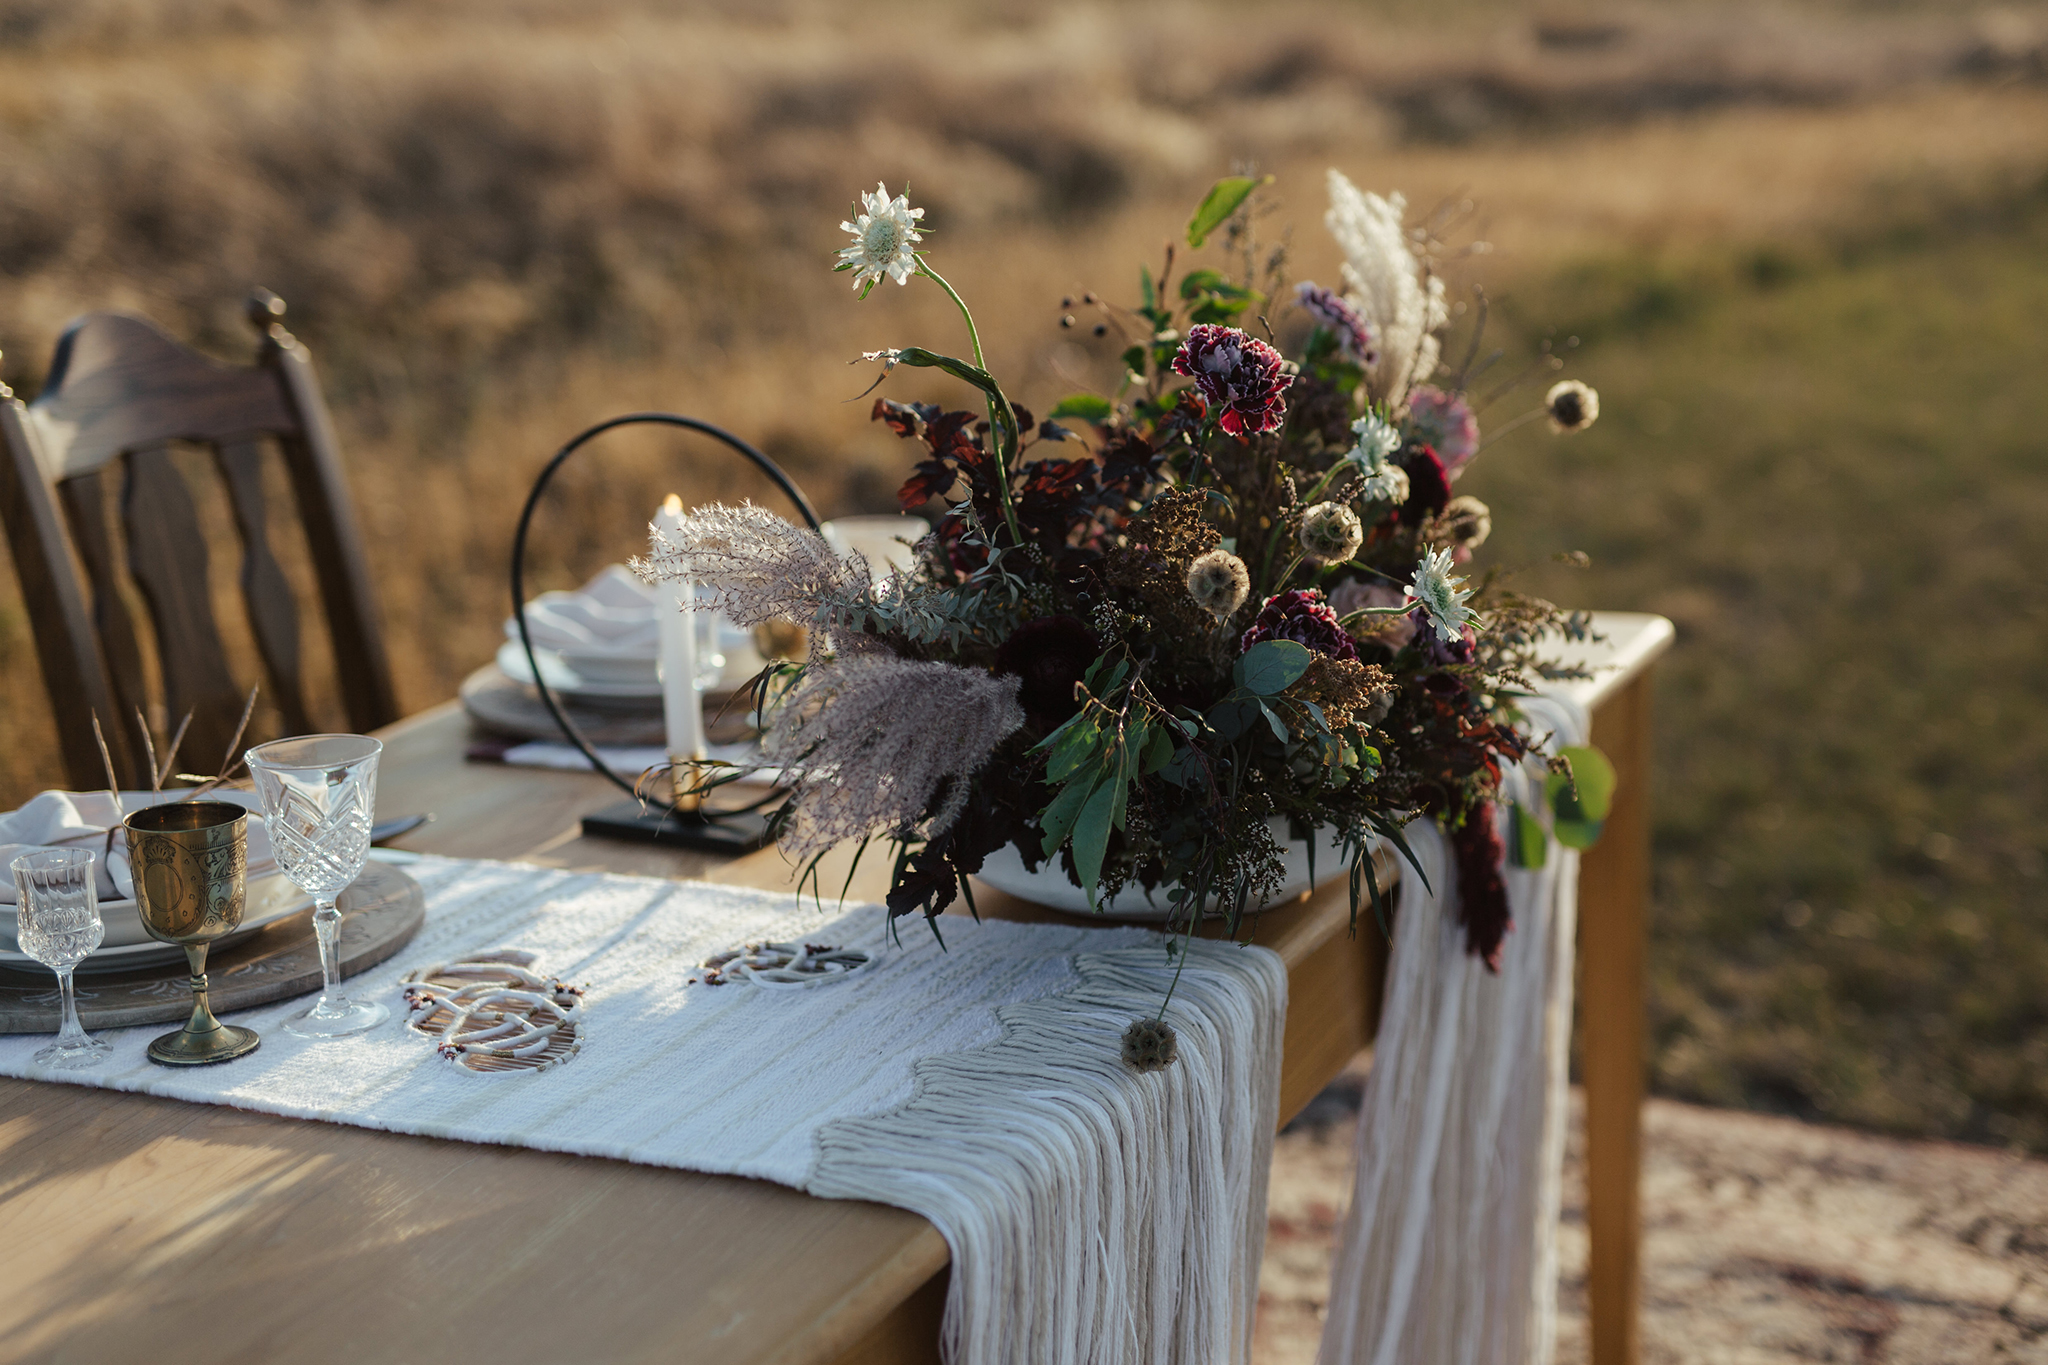 Becca and Reid's Countryside Vow Renewal // Styled Inspiration outside of Calgary, Alberta - Bronte Bride